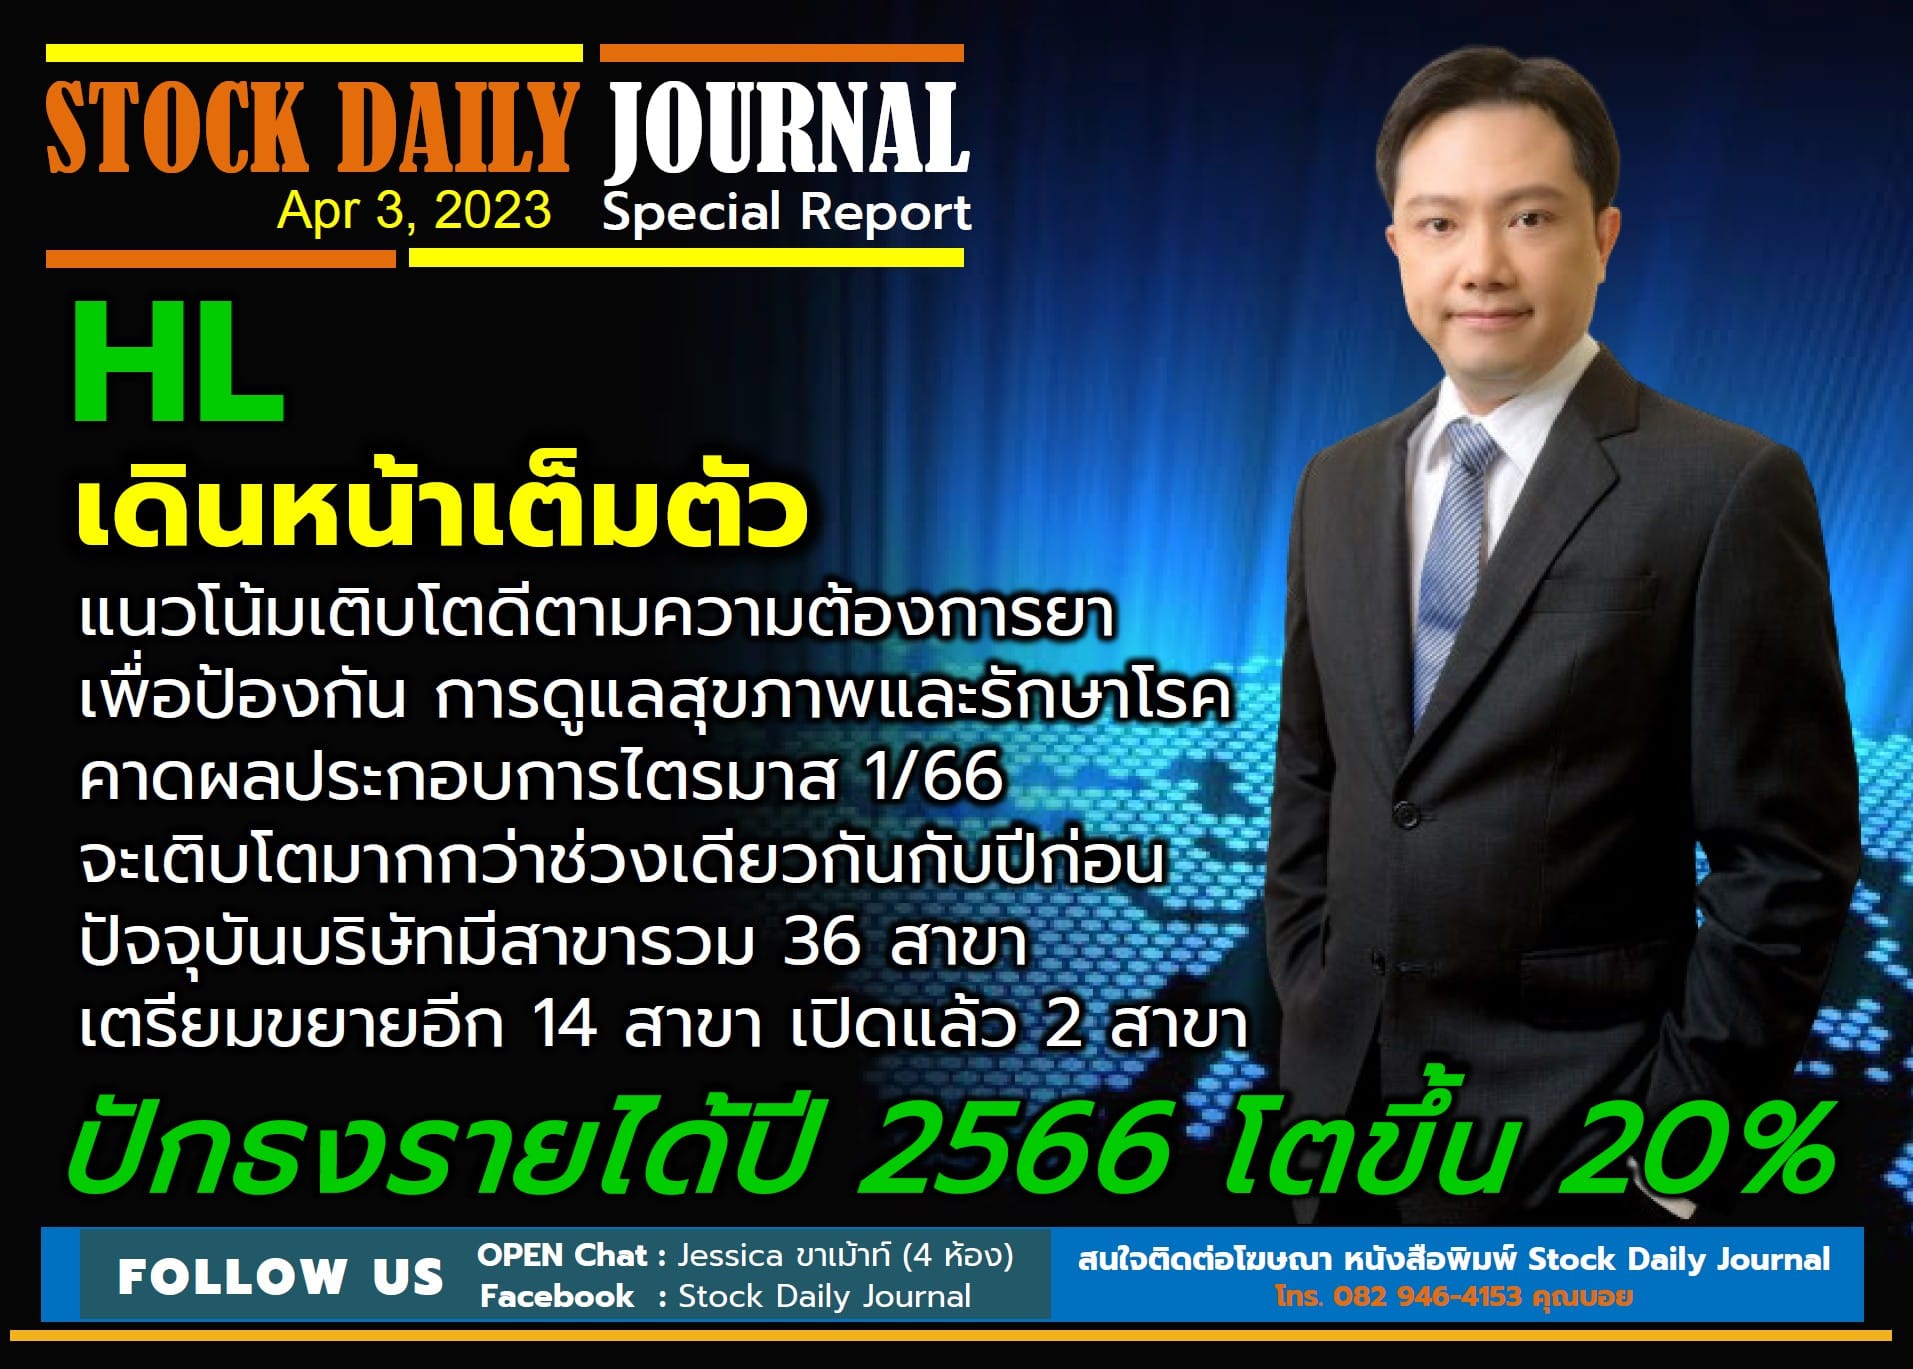 STOCK DAILY JOURNAL “Special Report : HL”